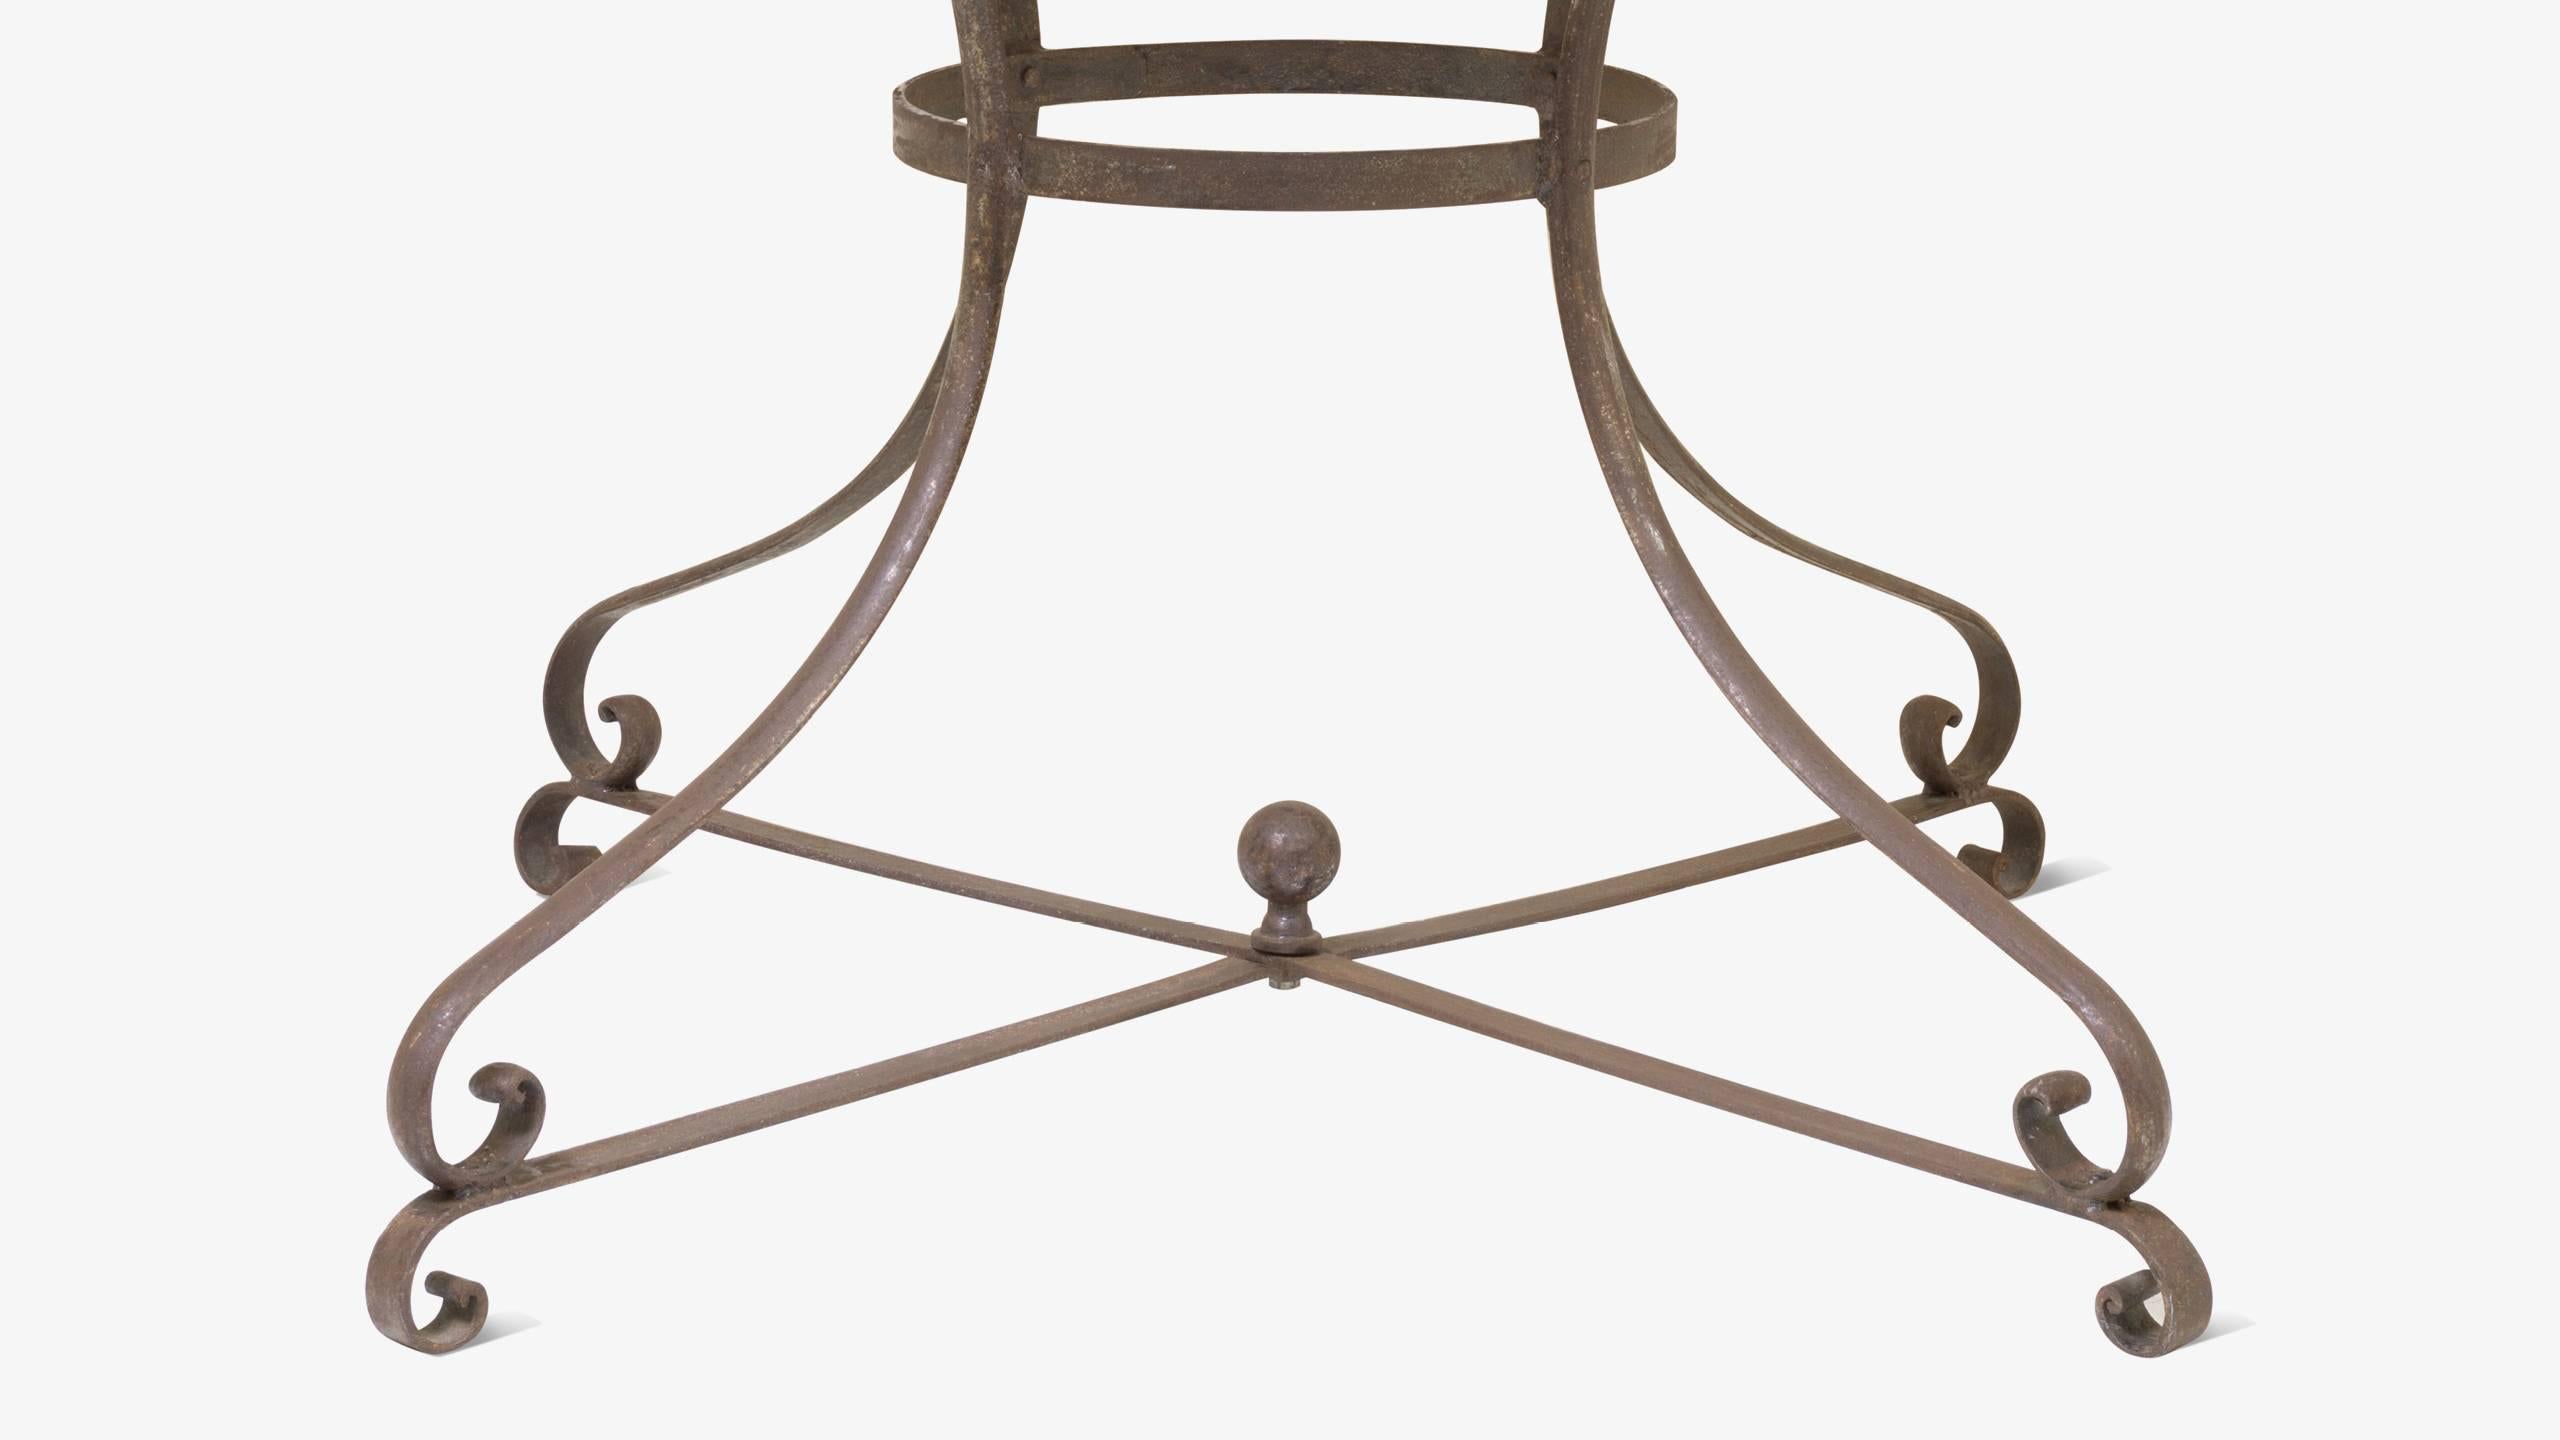 A piece rich with history and patina. A generously sized Guéridon design bistro table crafted completely out of iron. The base is a simple yet elegant wrought iron classic design with delicate curves and an impressive ball finial at its center. The